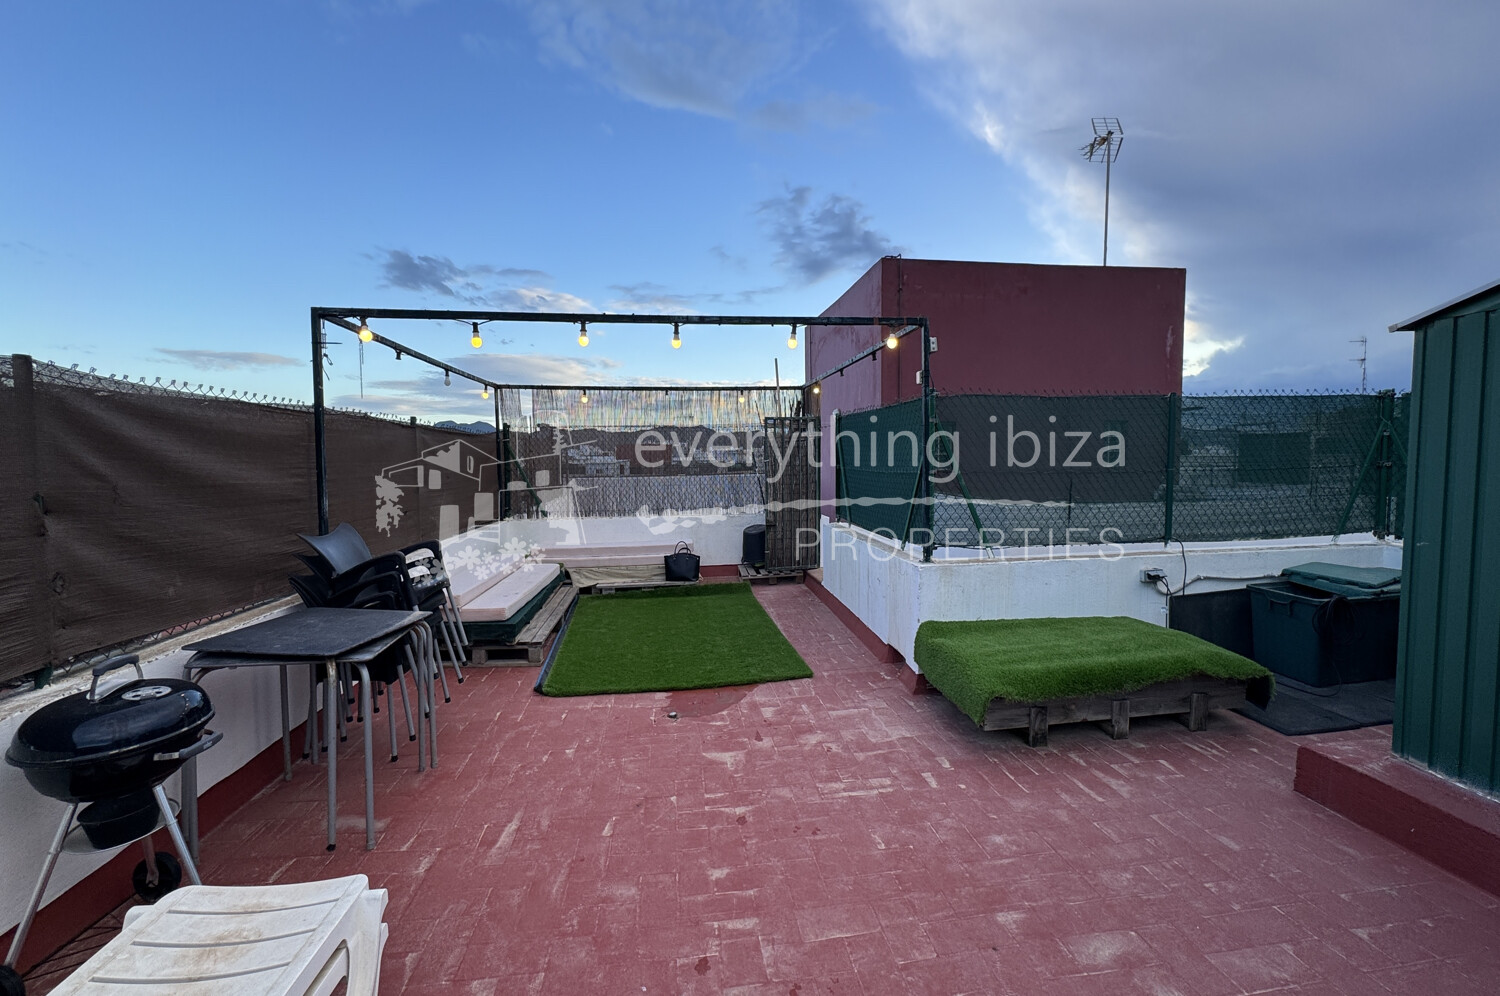 Three Bedroom Penthouse Apartment with Large Sea & Sunset View Roof Terrace, ref. 1678, for sale in Ibiza by everything ibiza Properties